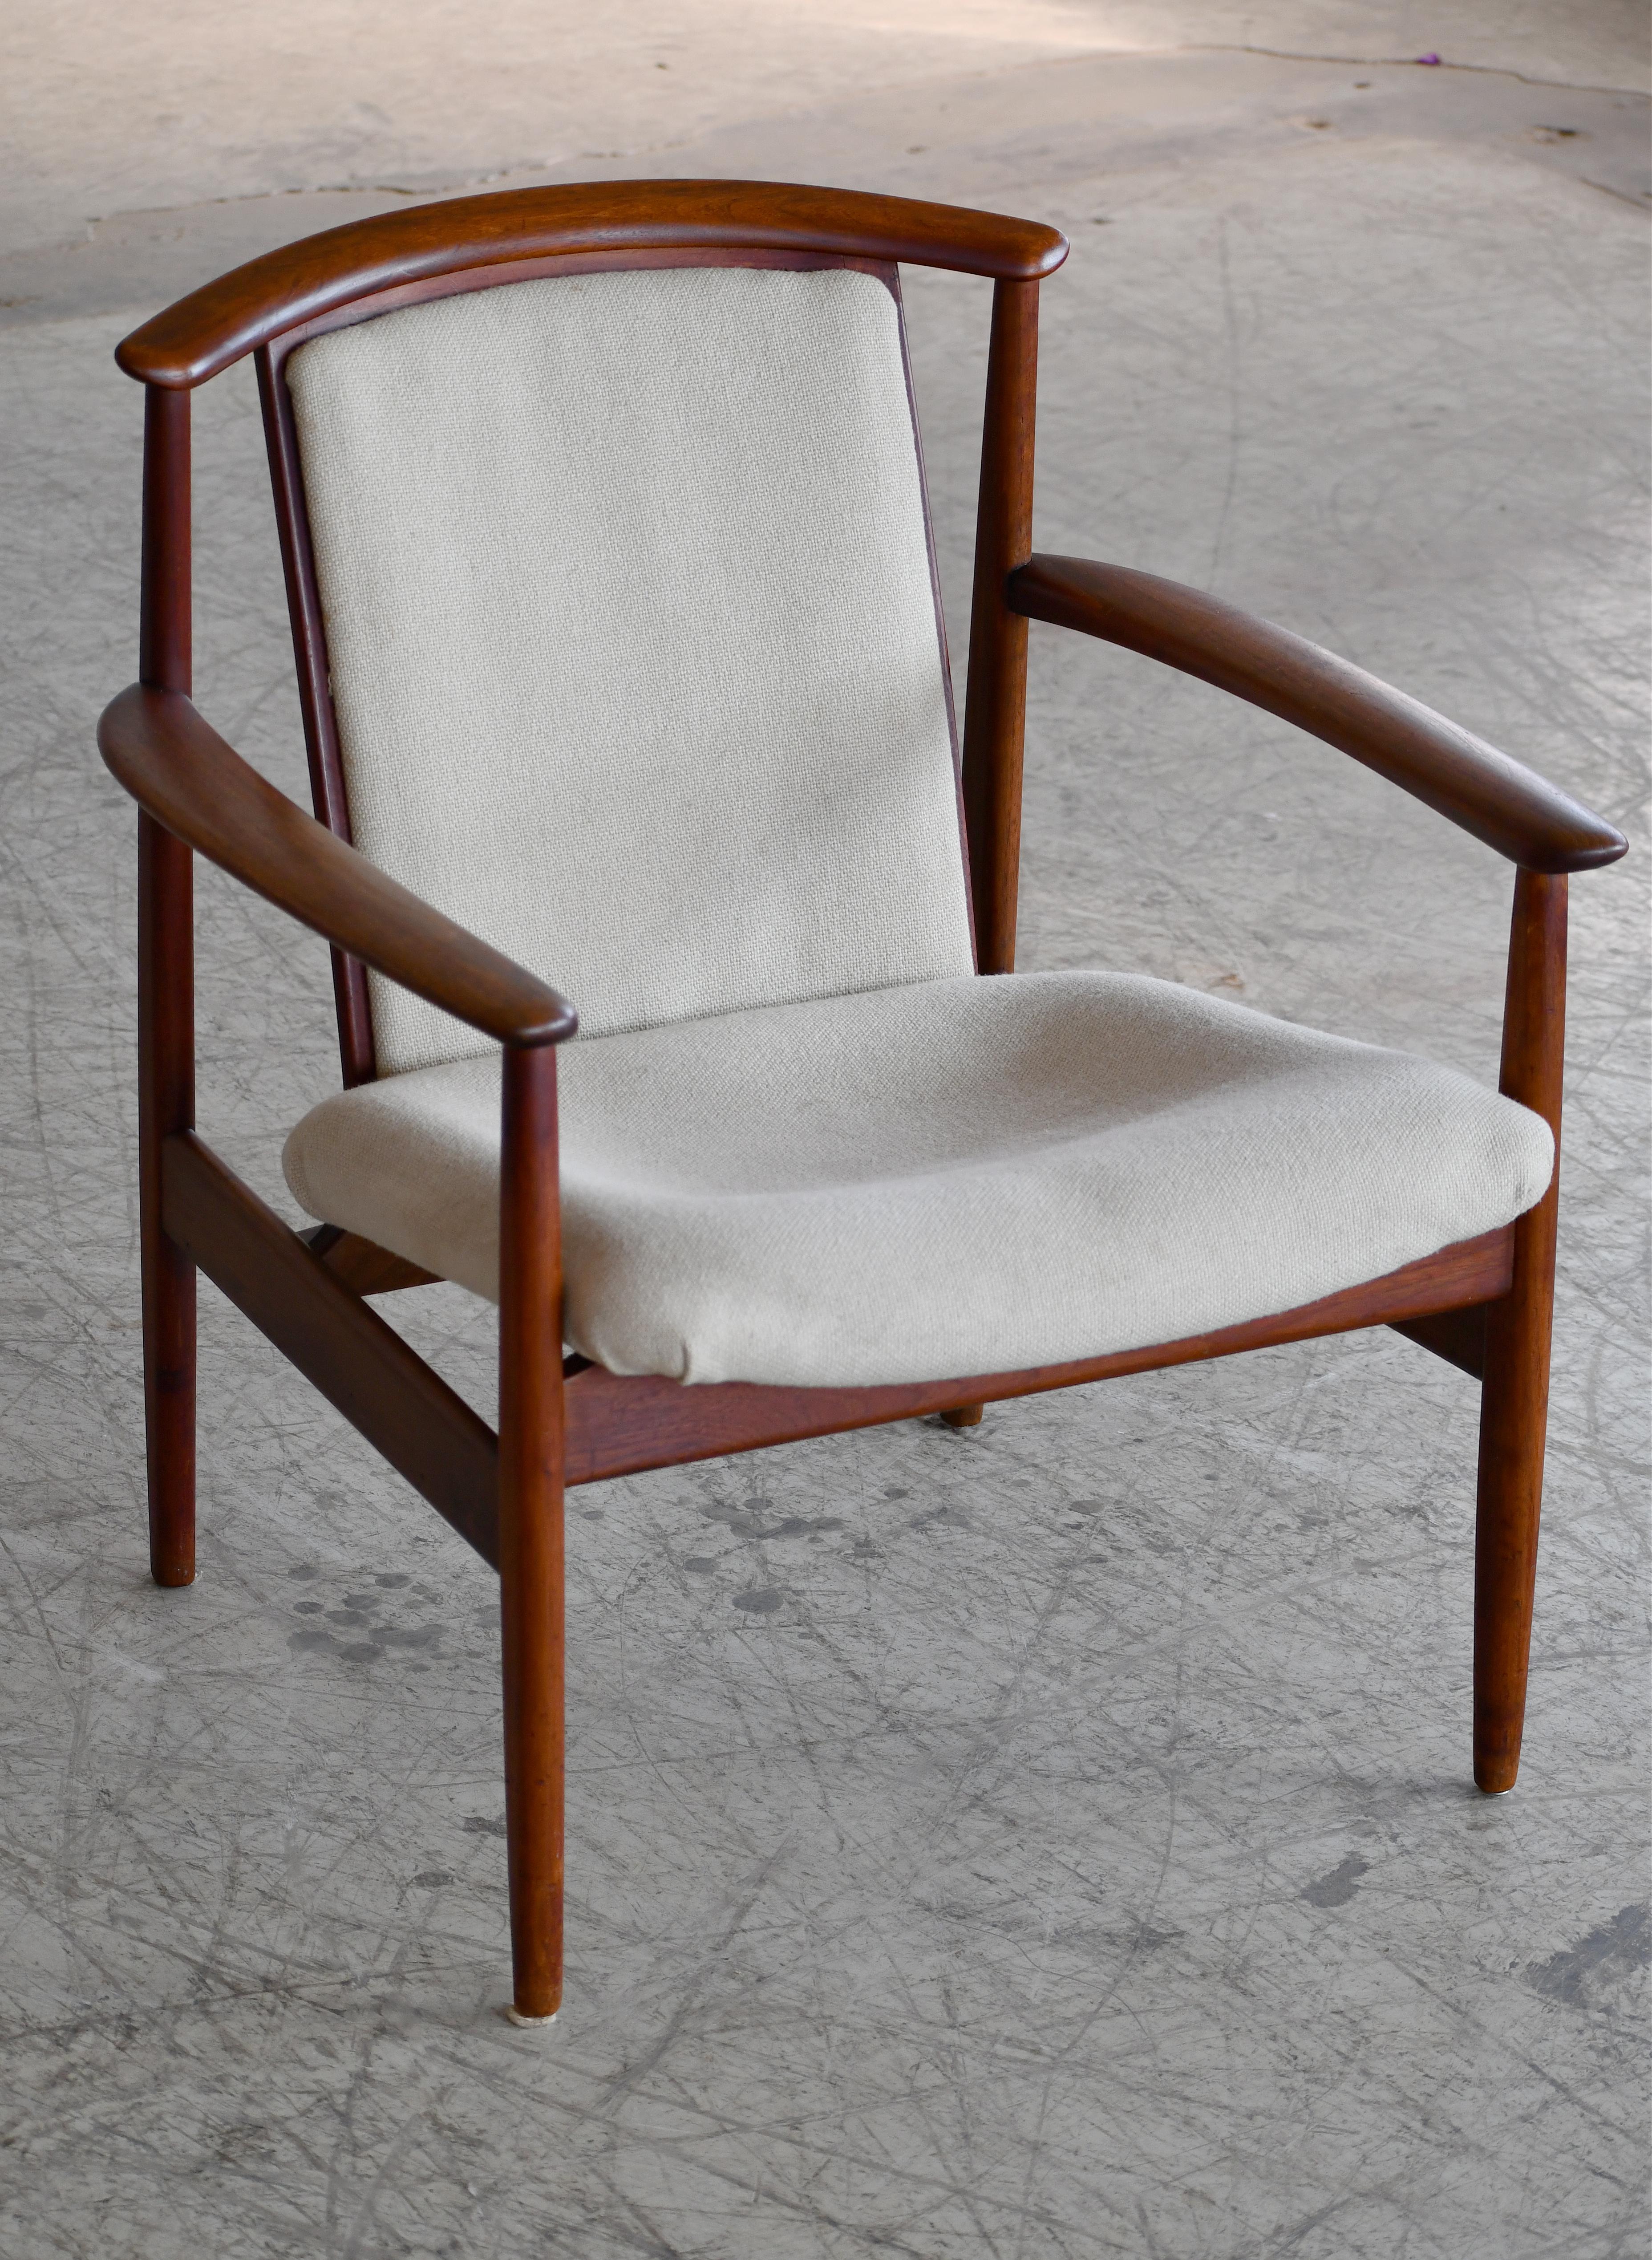 Swedish Scandinavian Midcentury Easy Lounge Chair by Folke Ohlsson for DUX, 1950's For Sale